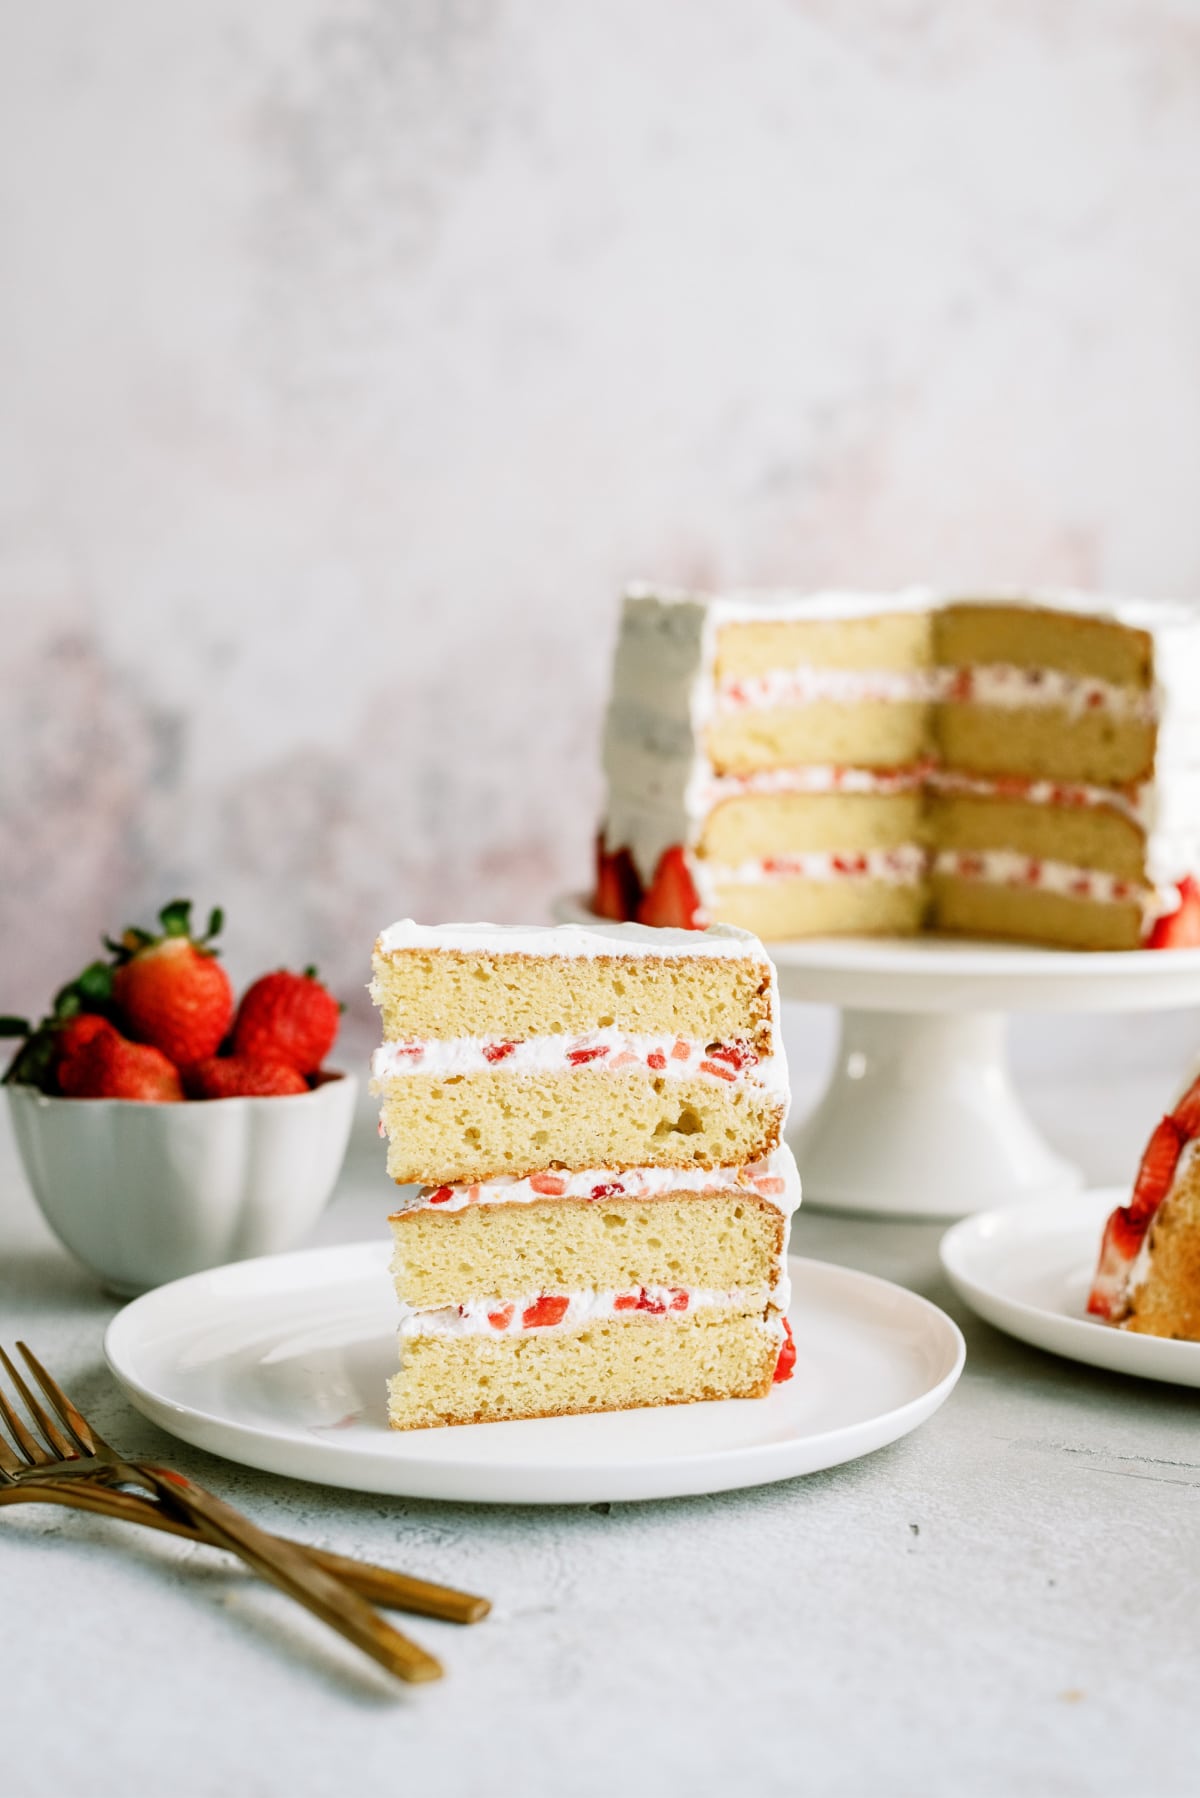 strawberry cake with a slice on plate